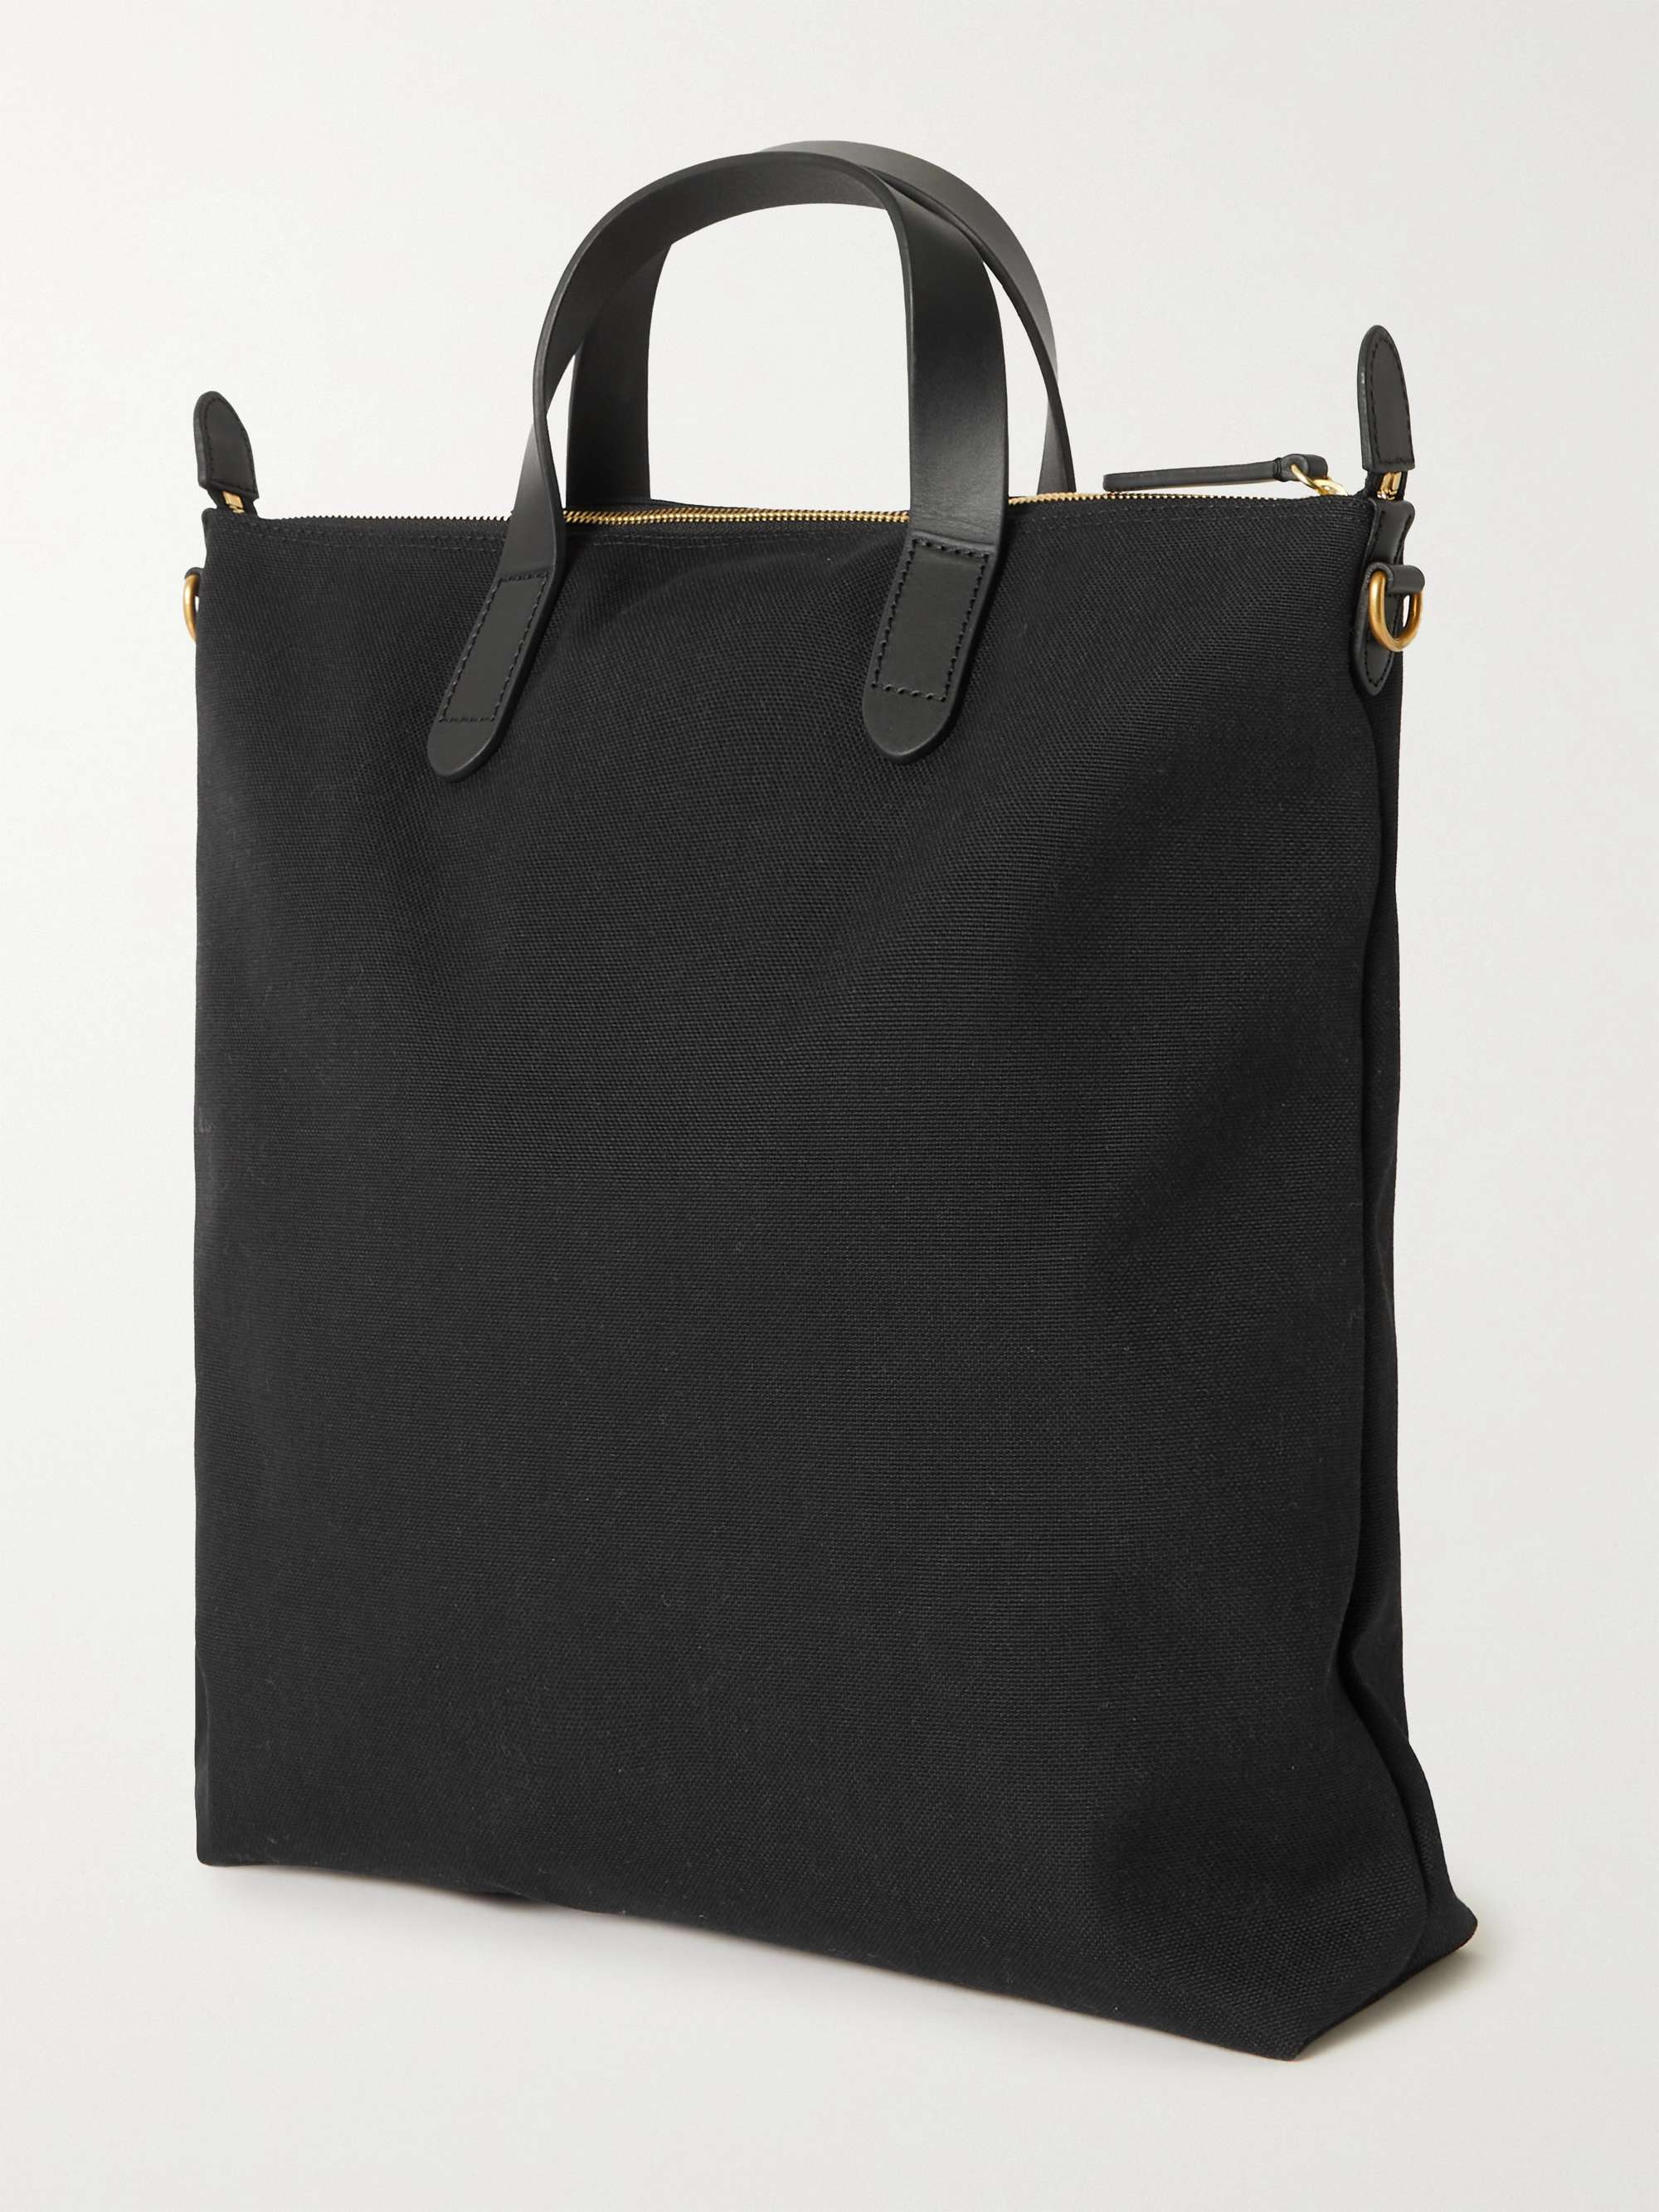 MISMO Leather-Trimmed Canvas Tote Bag